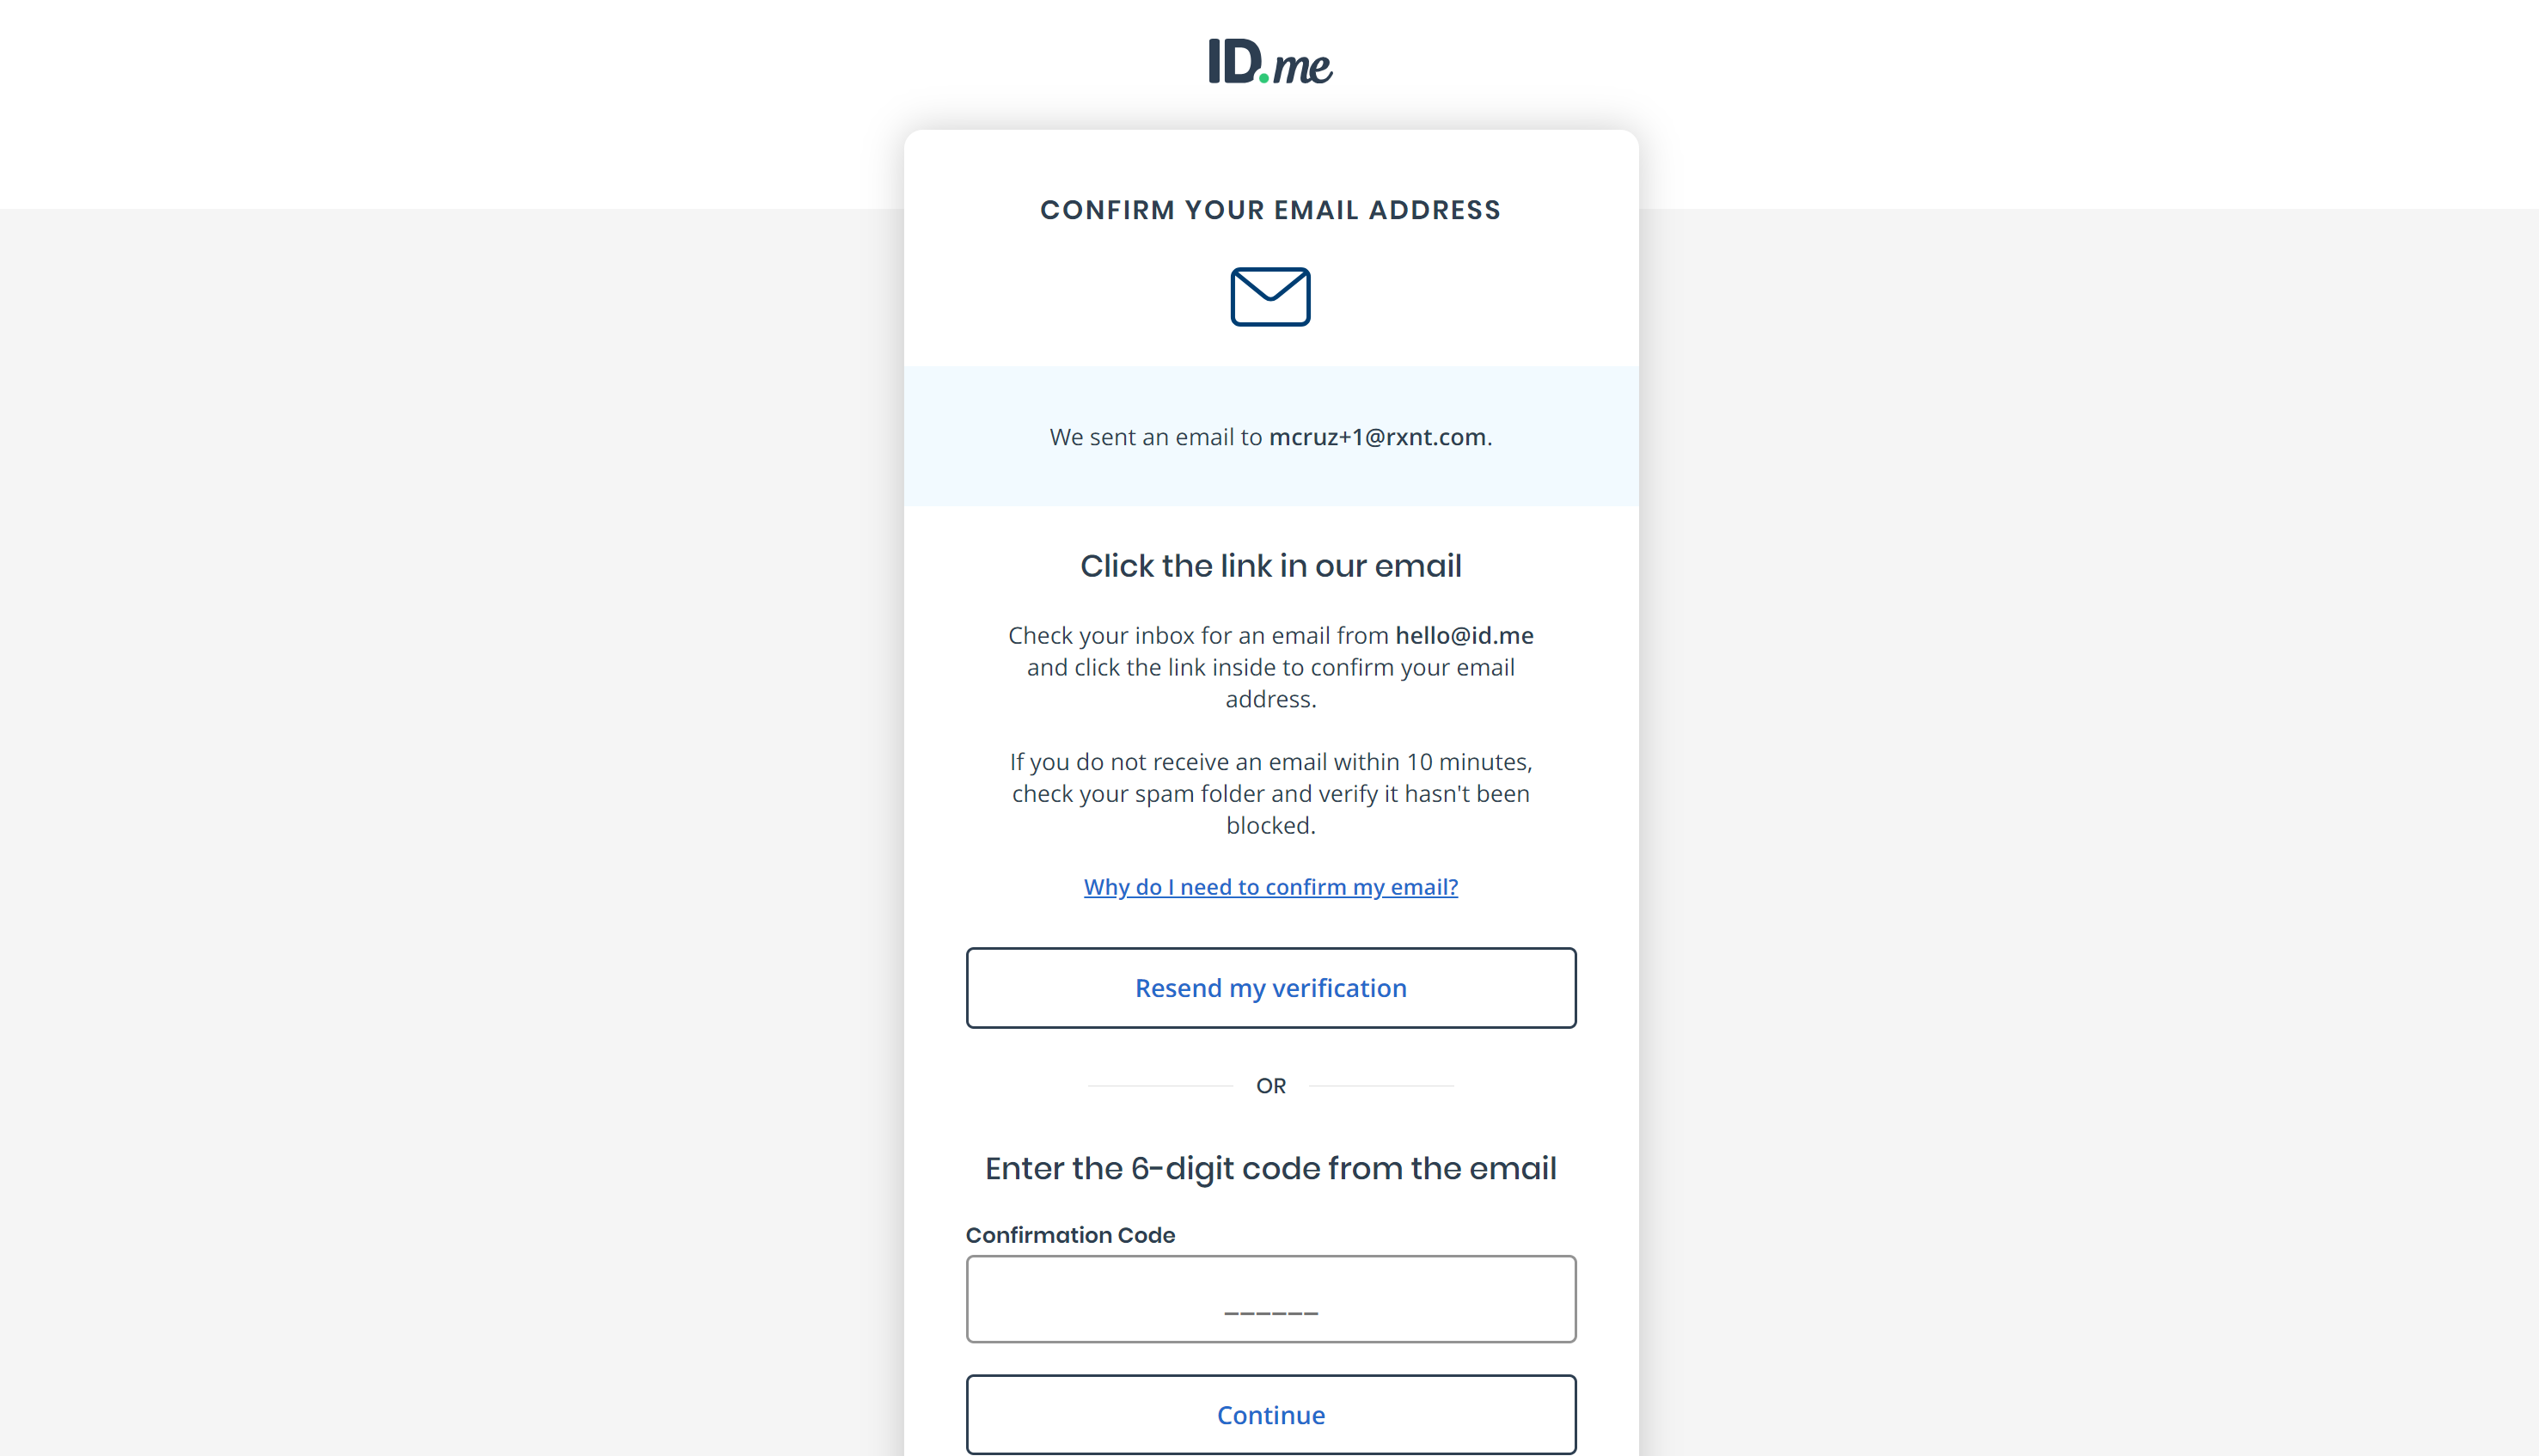 Confirm email address for creating ID.me account.png